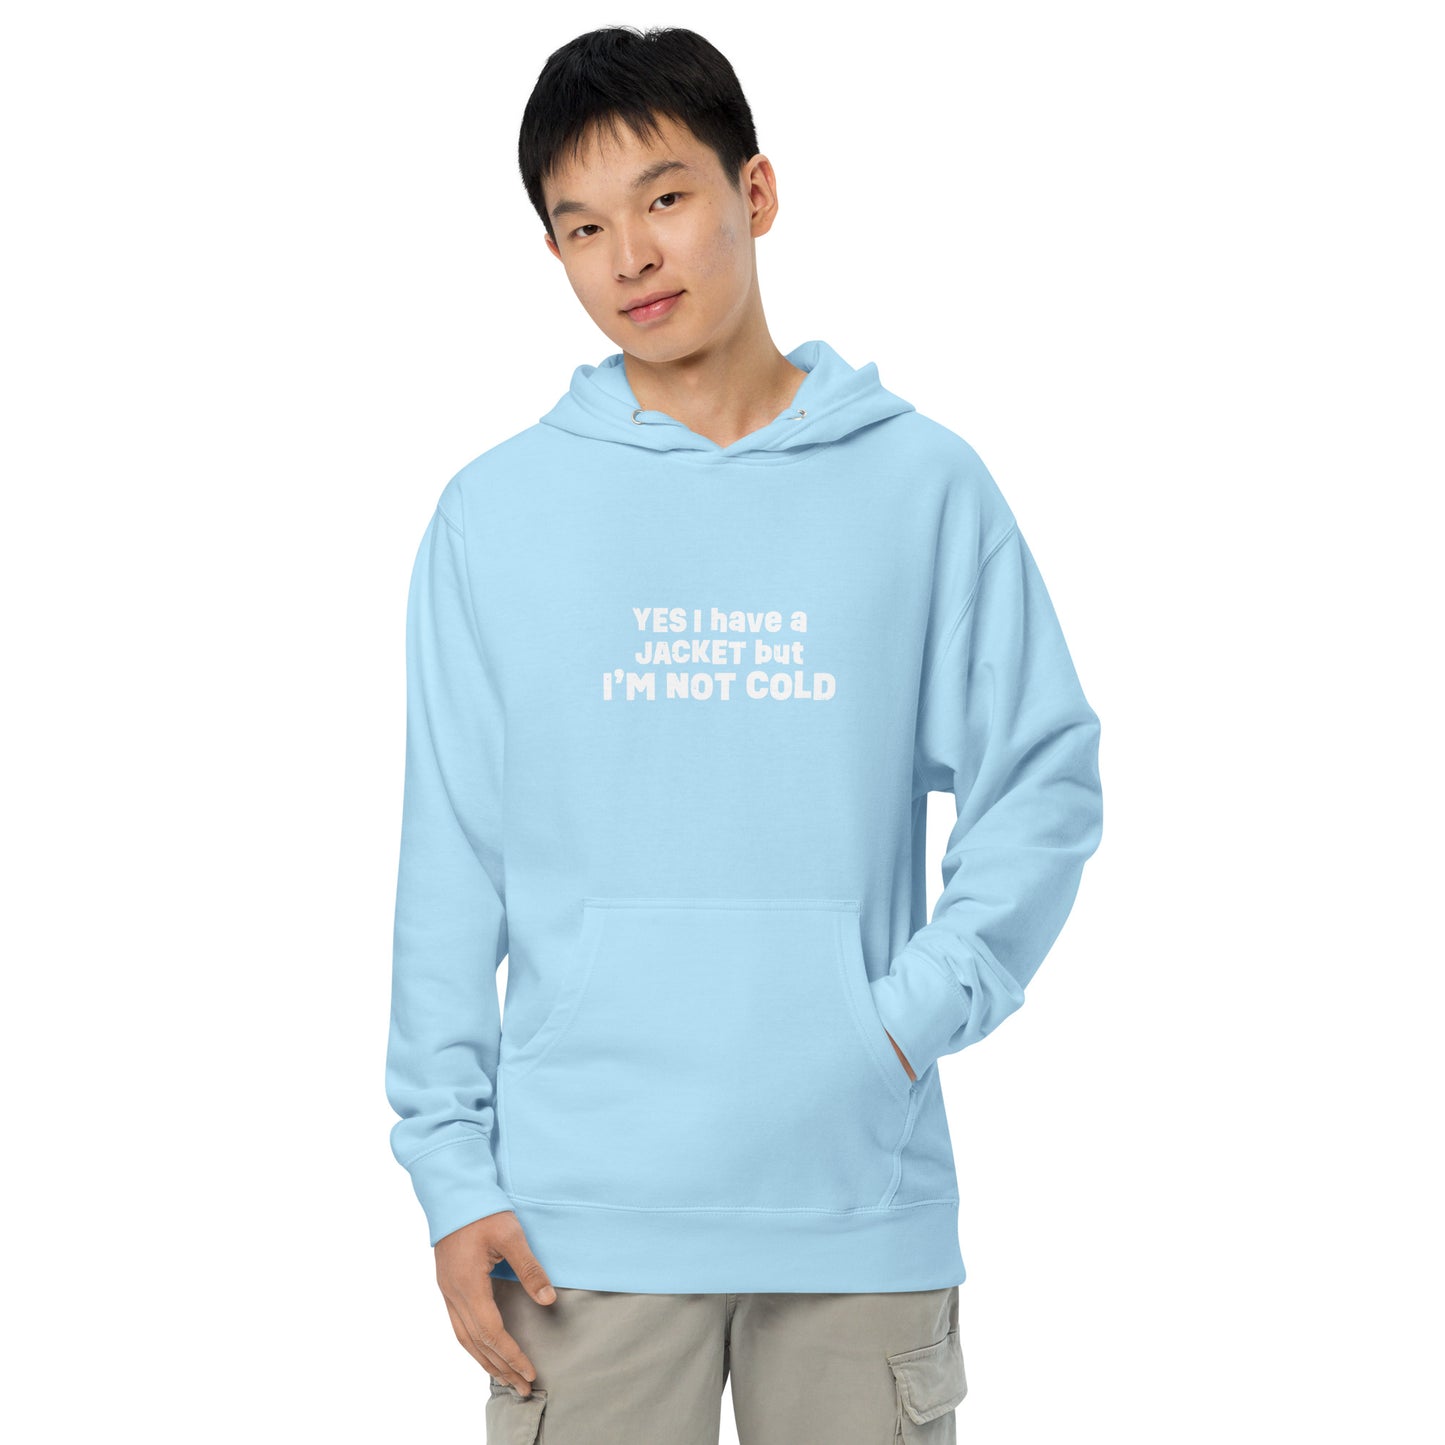 I'm Not Cold hoodie (adult sizes)